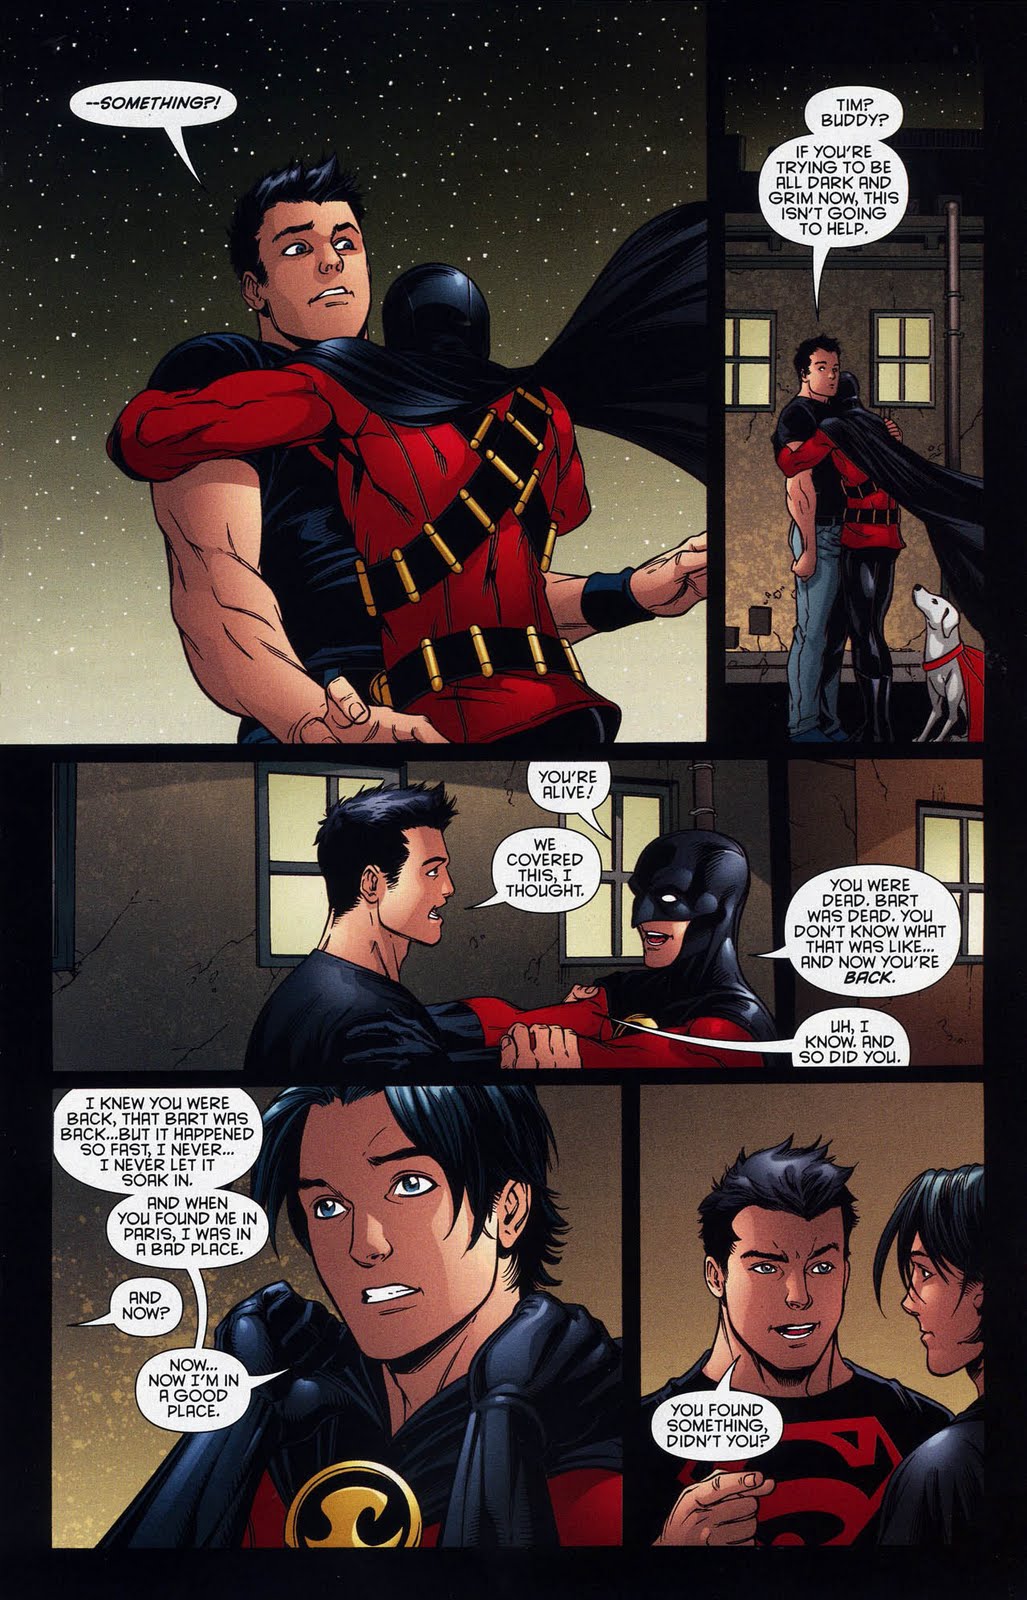 ComicPageOfTheWeekend Red Robin and Superboy G33K Life